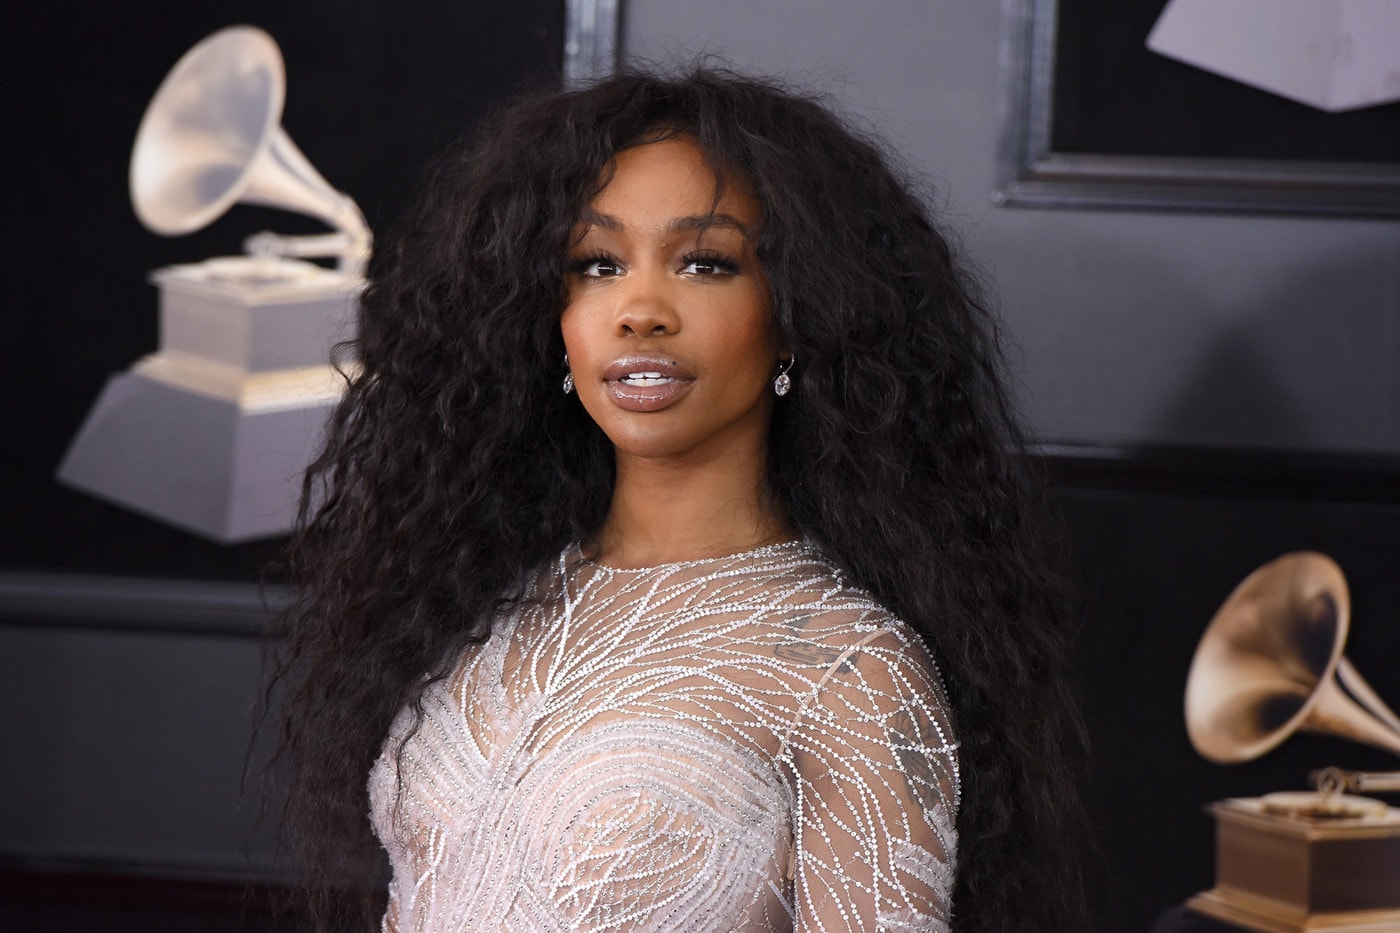 Sephora Shuts Down Stores for Diversity Training SZA Racially Profiled Store Stealing Report Progress Staff Course 